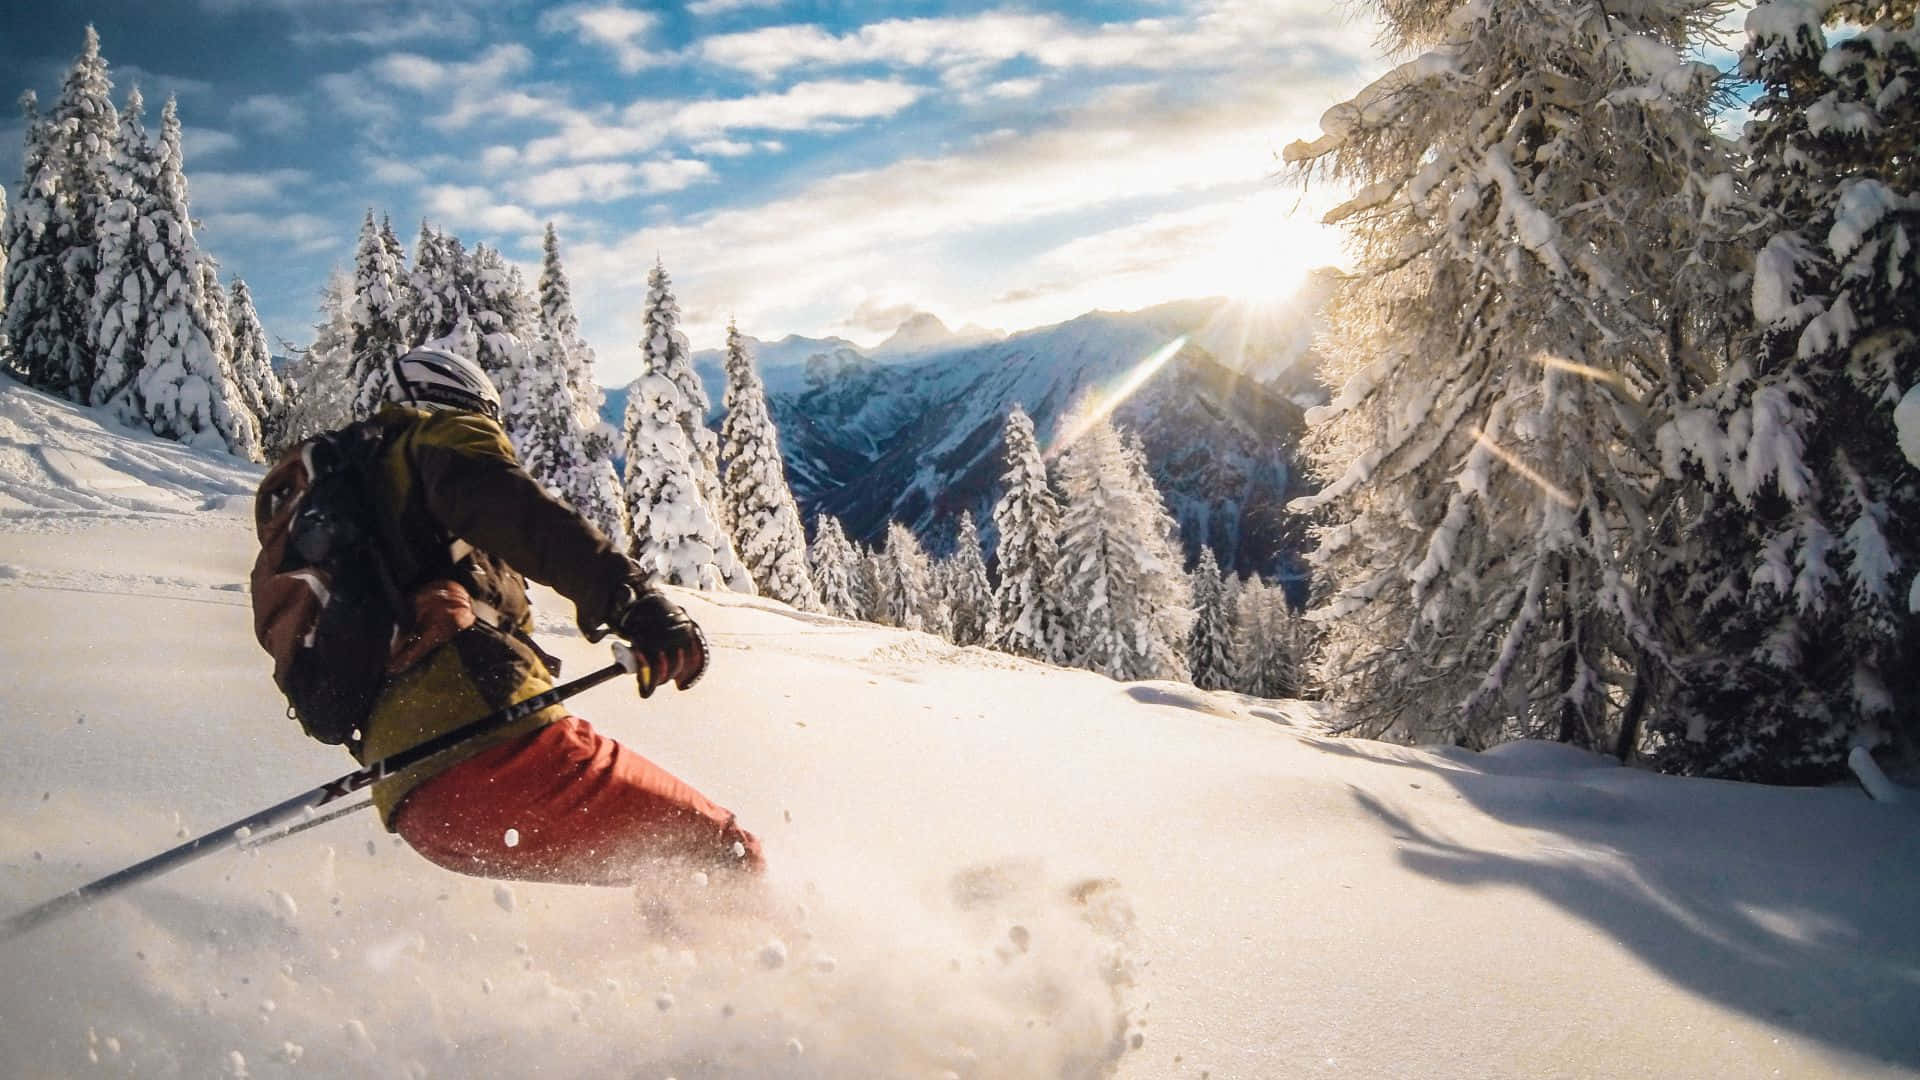 Enjoy the thrill of Skiing on a snow-capped mountain Wallpaper